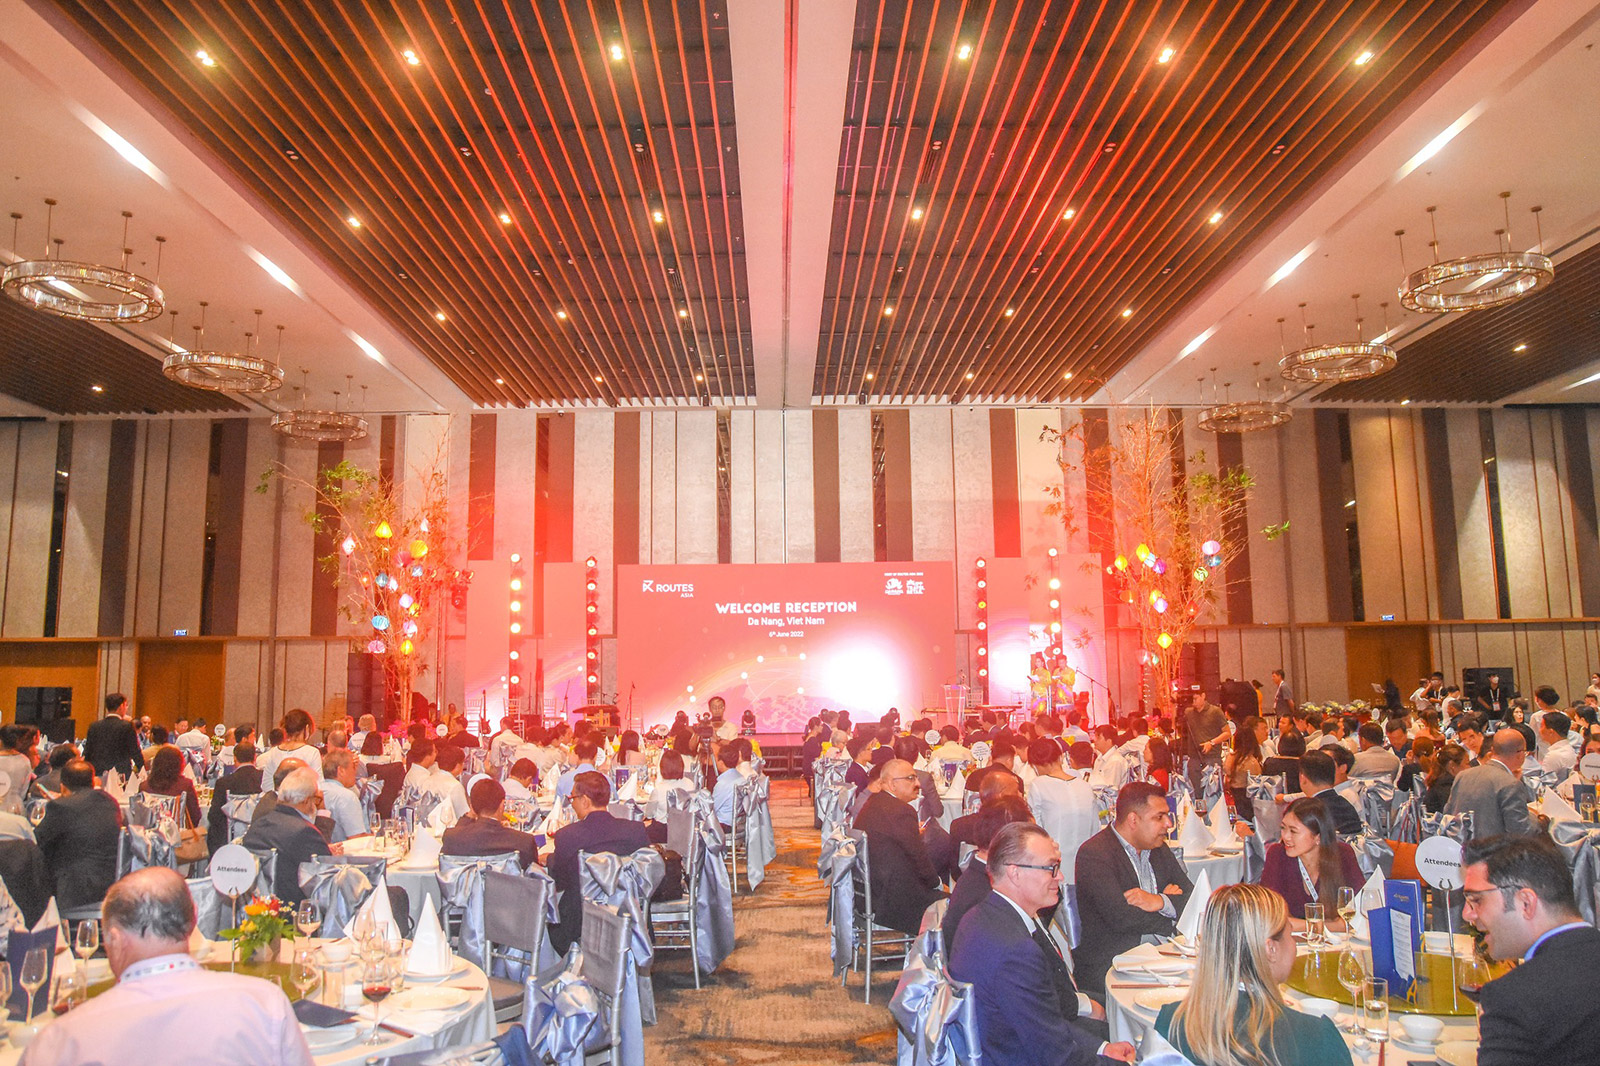 WELCOM RECEPTION - NIGHT OF ROUTE ASIA 2022 AT ARIYANA CONVENTION CENTRE DANANG